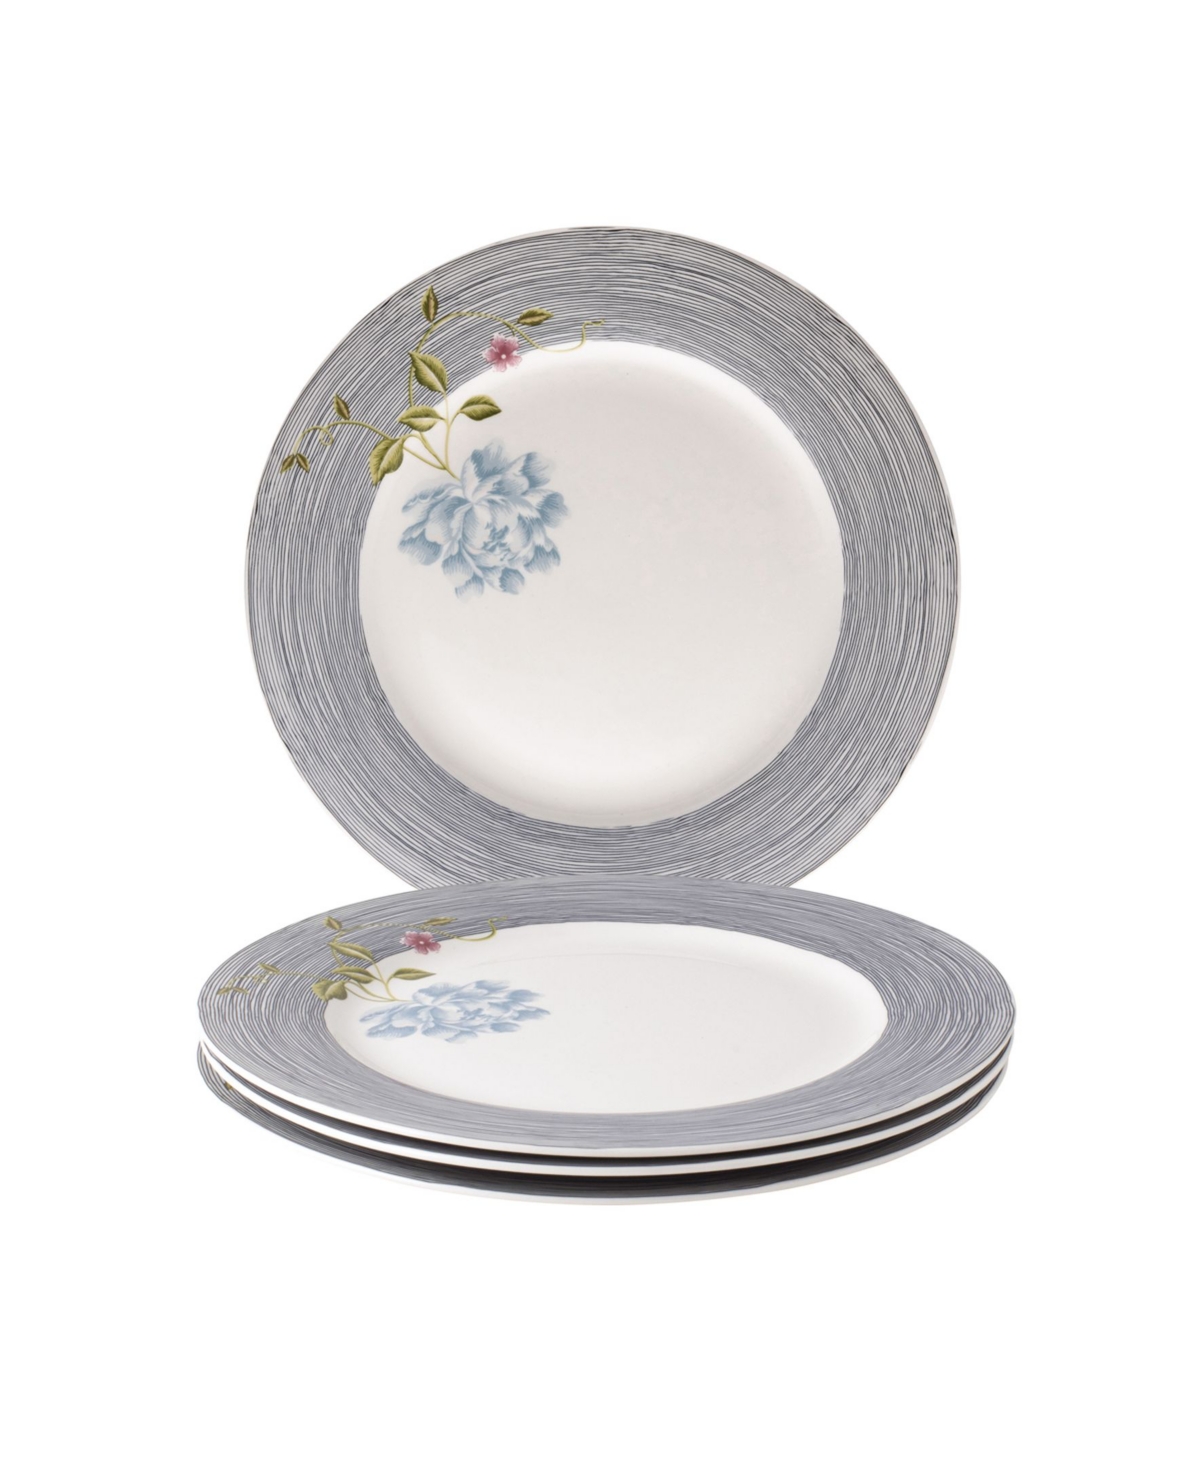 LAURA ASHLEY HERITAGE COLLECTABLES MIDNIGHT PINSTRIPE PLATES IN GIFT BOX, SET OF 4